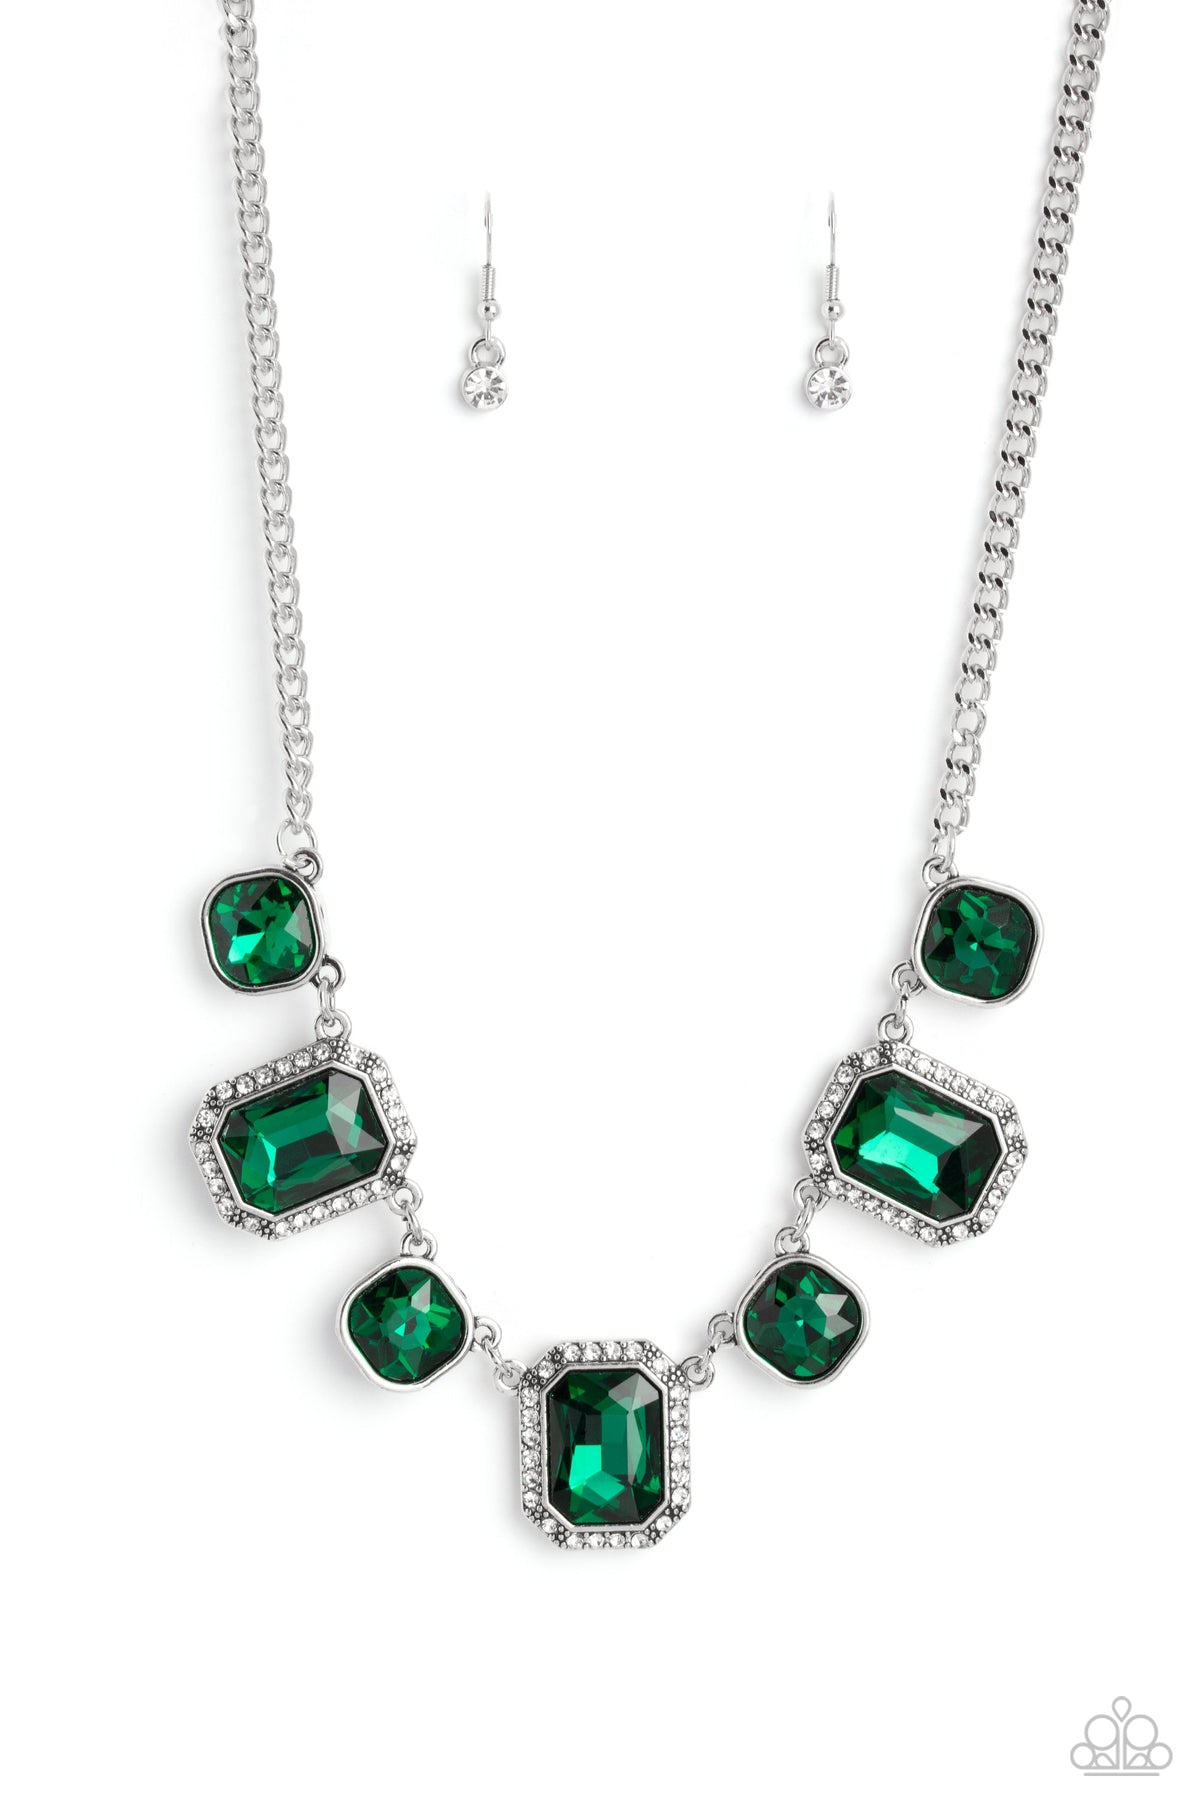 Royal Rumble Green Rhinestone Necklace - Paparazzi Accessories- lightbox - CarasShop.com - $5 Jewelry by Cara Jewels